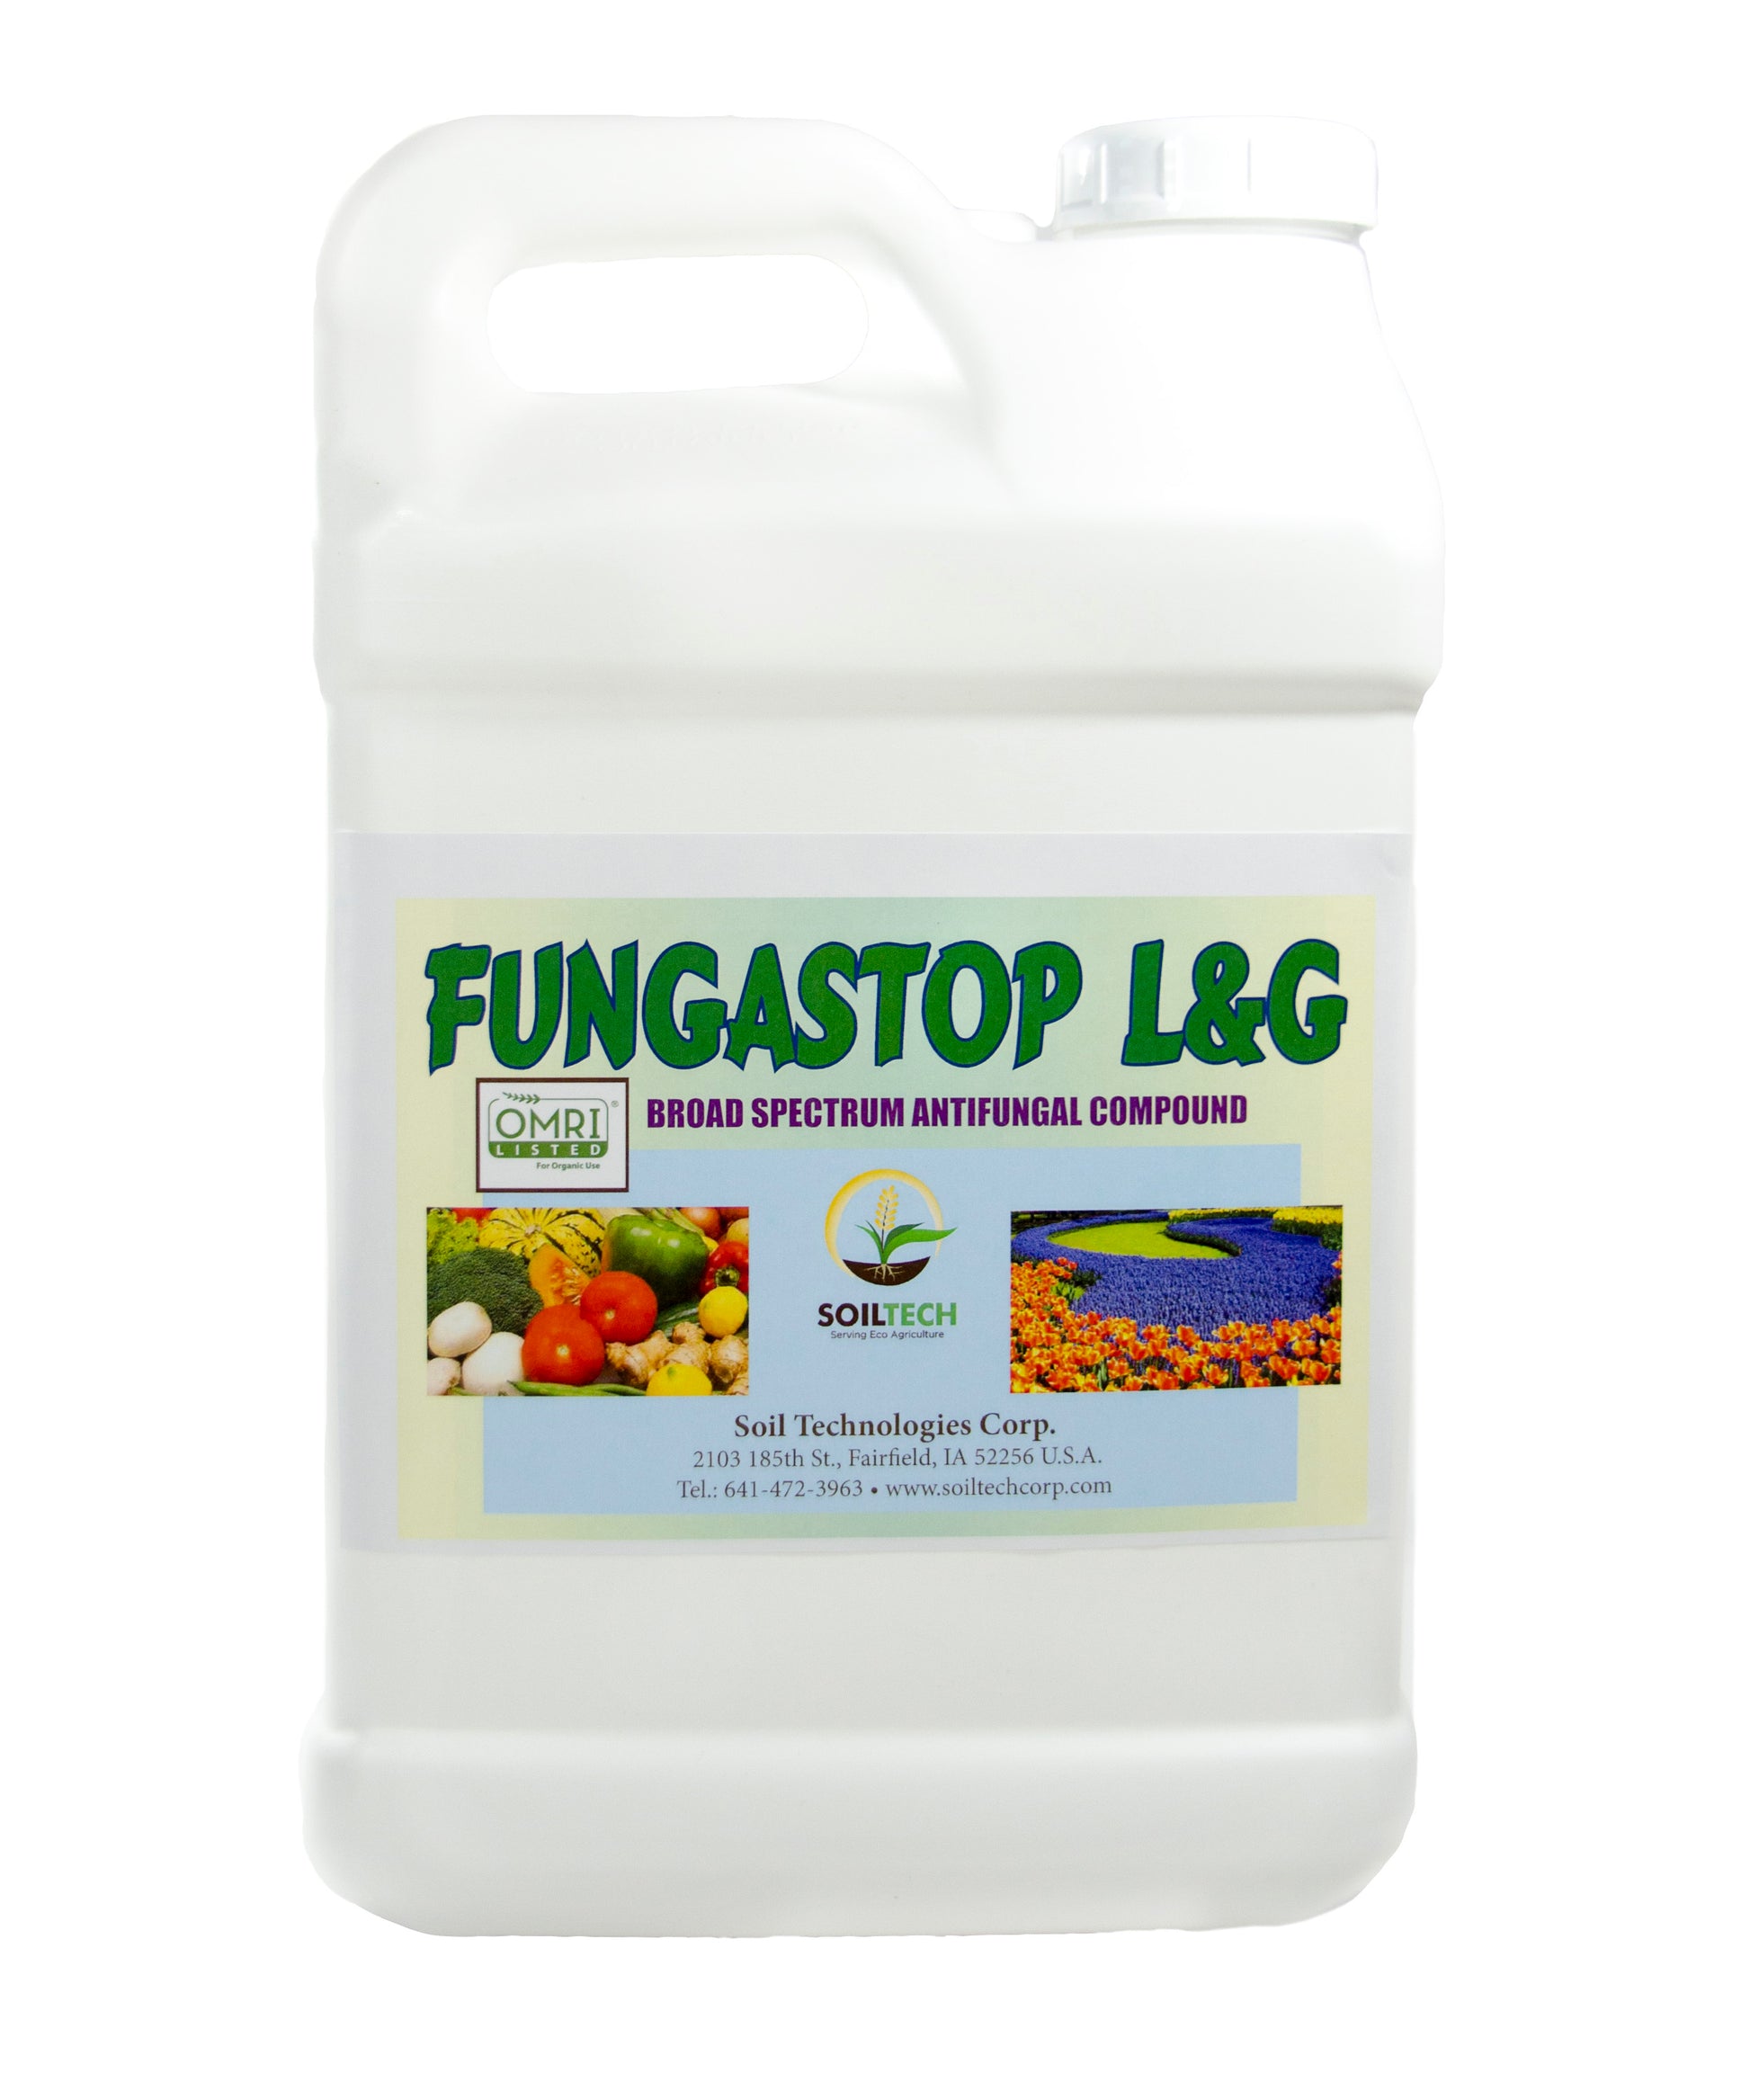 Fungastop broad spectrum antifungal compound. Developed and manufactured by Soil Technologies Corp. Made from natural ingredients.  